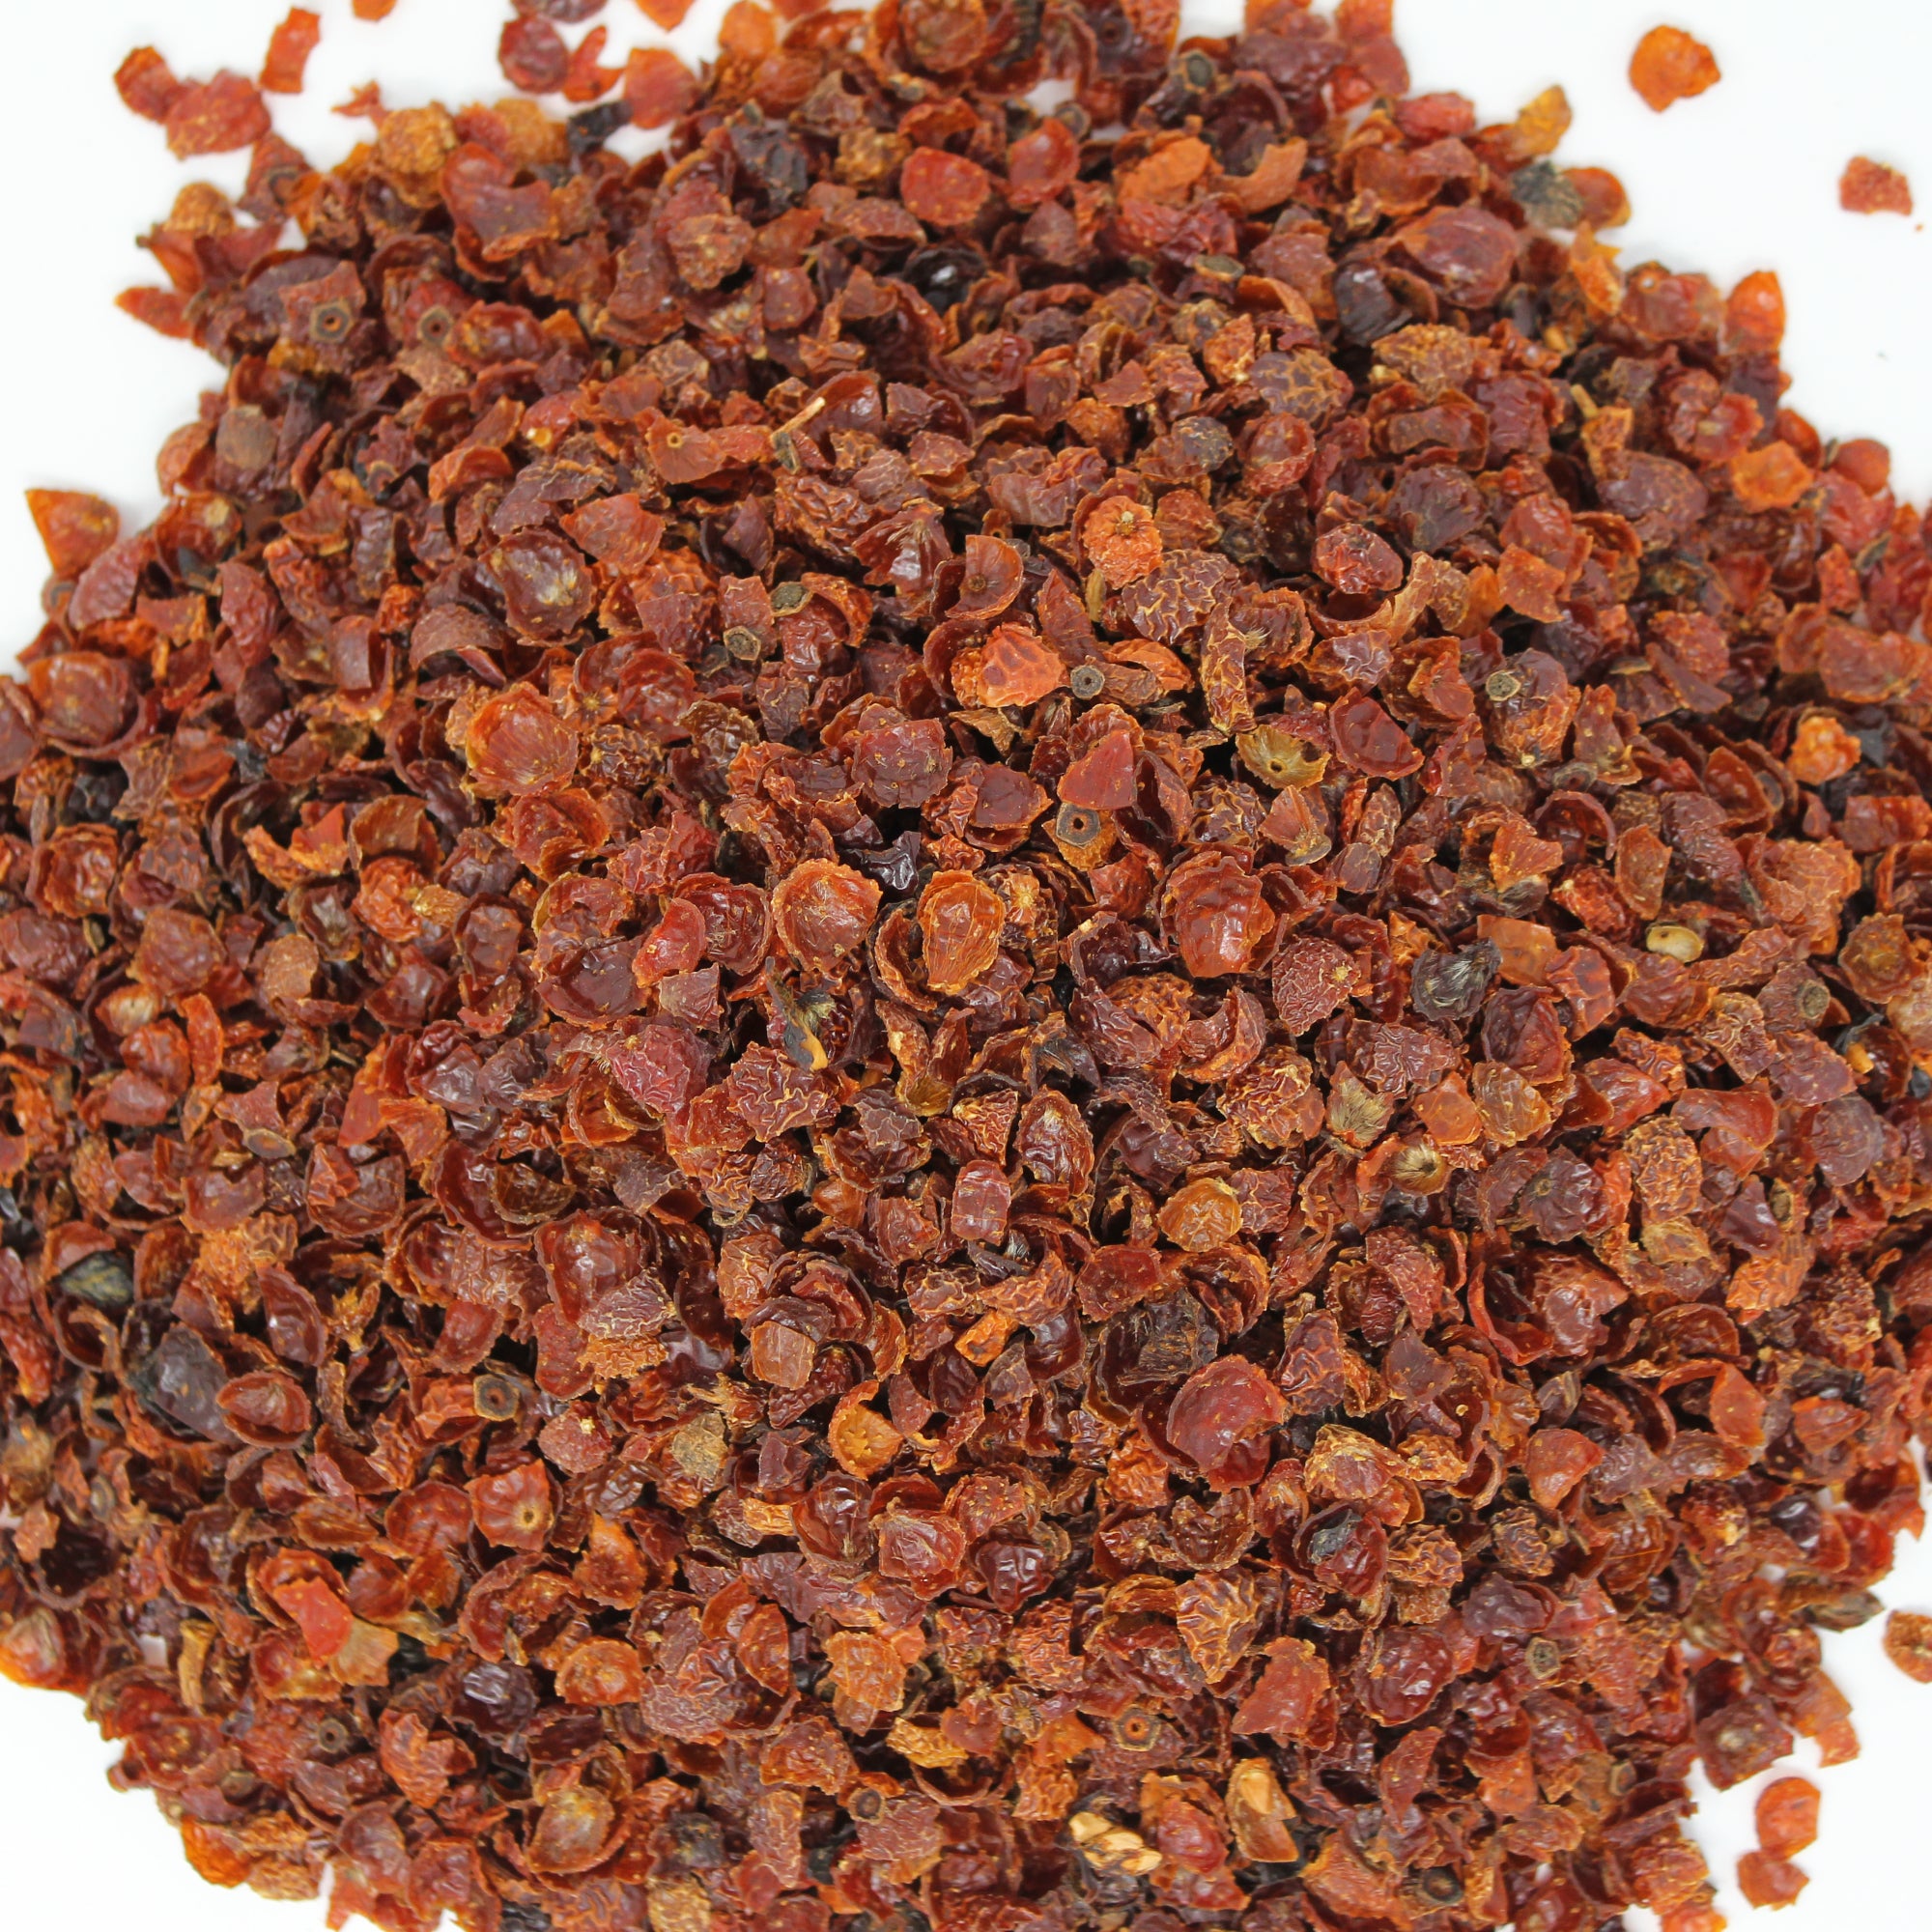 Rosehips Organic Cut and Sifted Seedless - 1 Pound (454 Grams) Suitable for Healing Tea, Tonic, Gourmet Cooking and Brewing Recipes | Foothills Naturals Canada | Ancient Herbs for Modern Use